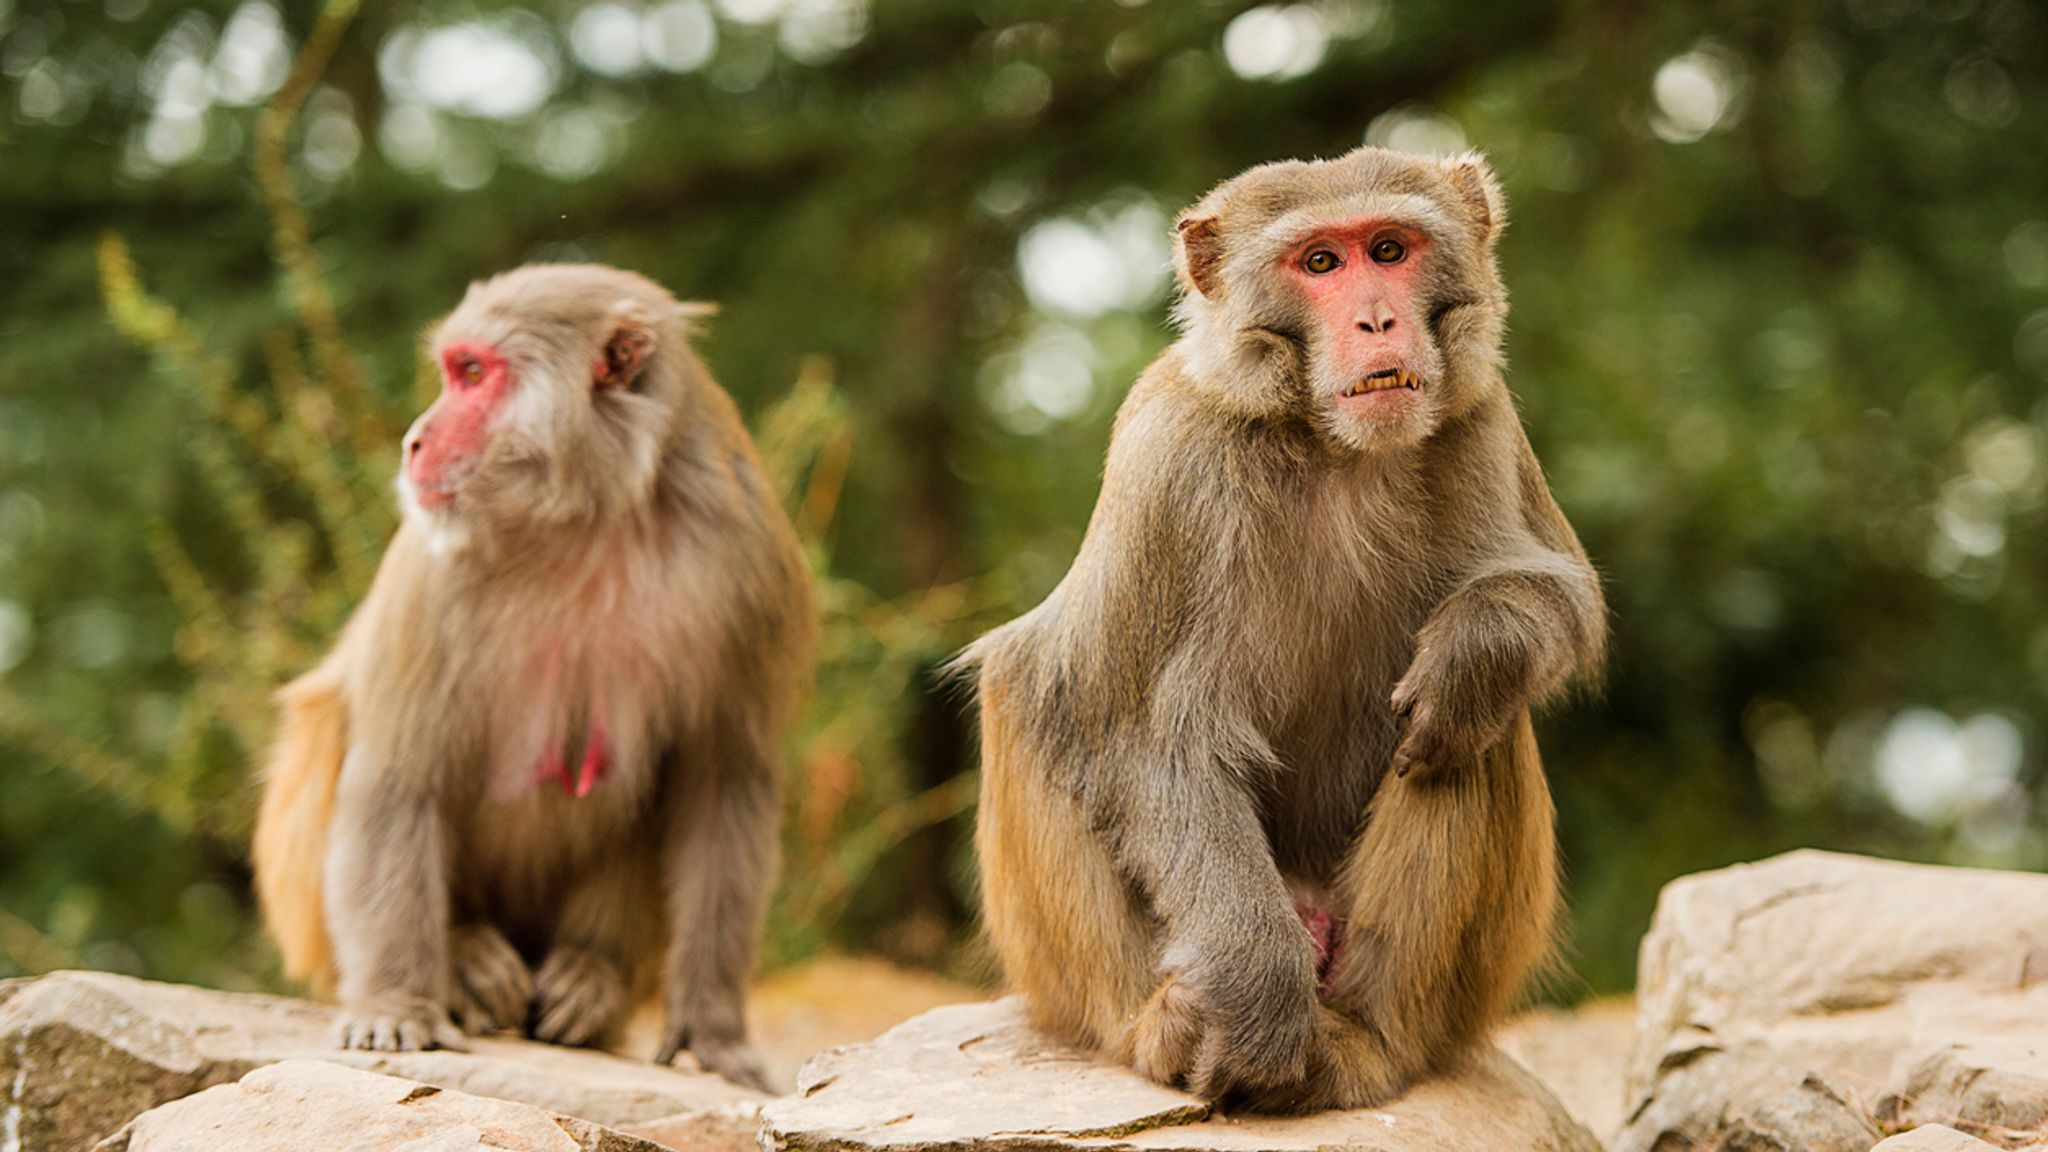 Extraordinary milestone' as monkey with pig's kidney lives for two years, Science & Tech News